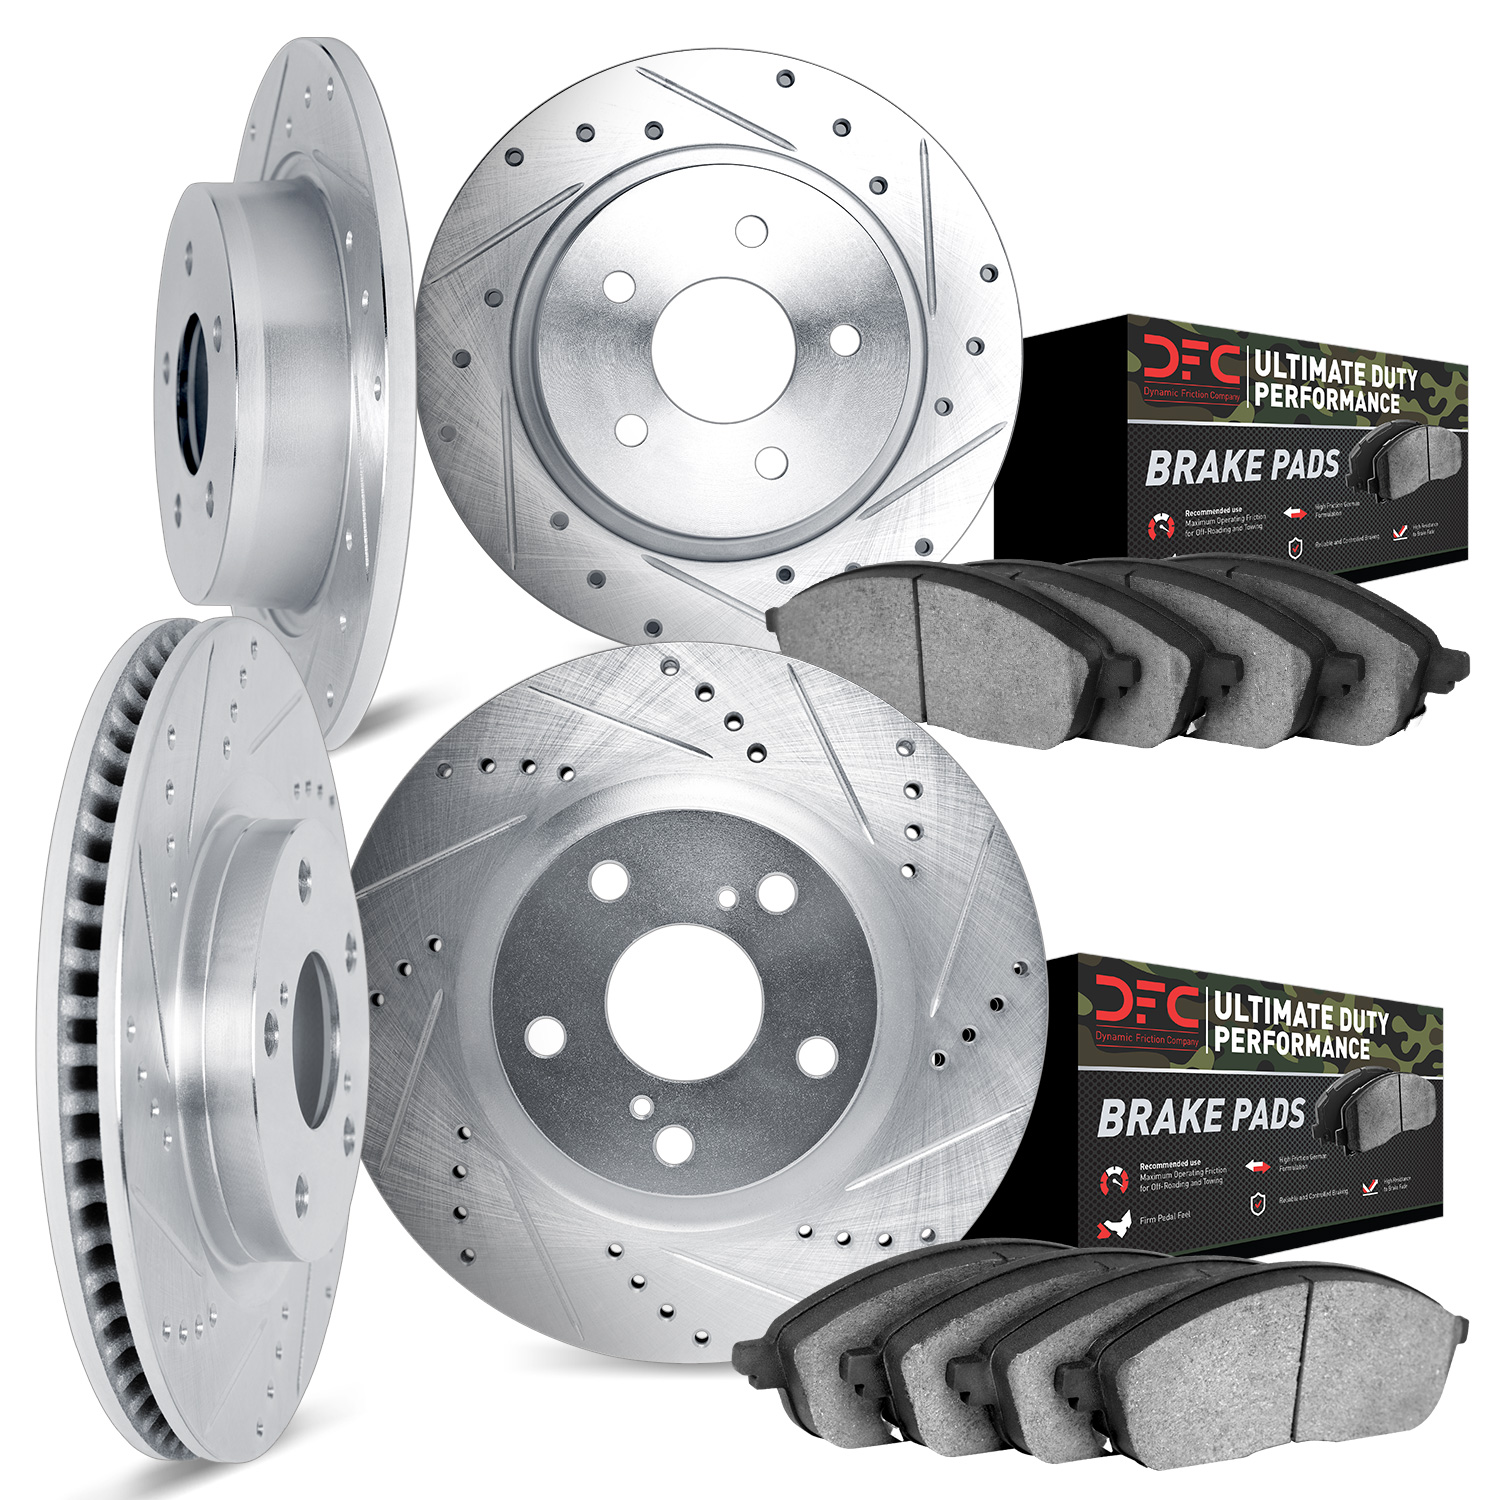 7404-42001 Drilled/Slotted Brake Rotors with Ultimate-Duty Brake Pads Kit [Silver], 2005-2010 Mopar, Position: Front and Rear